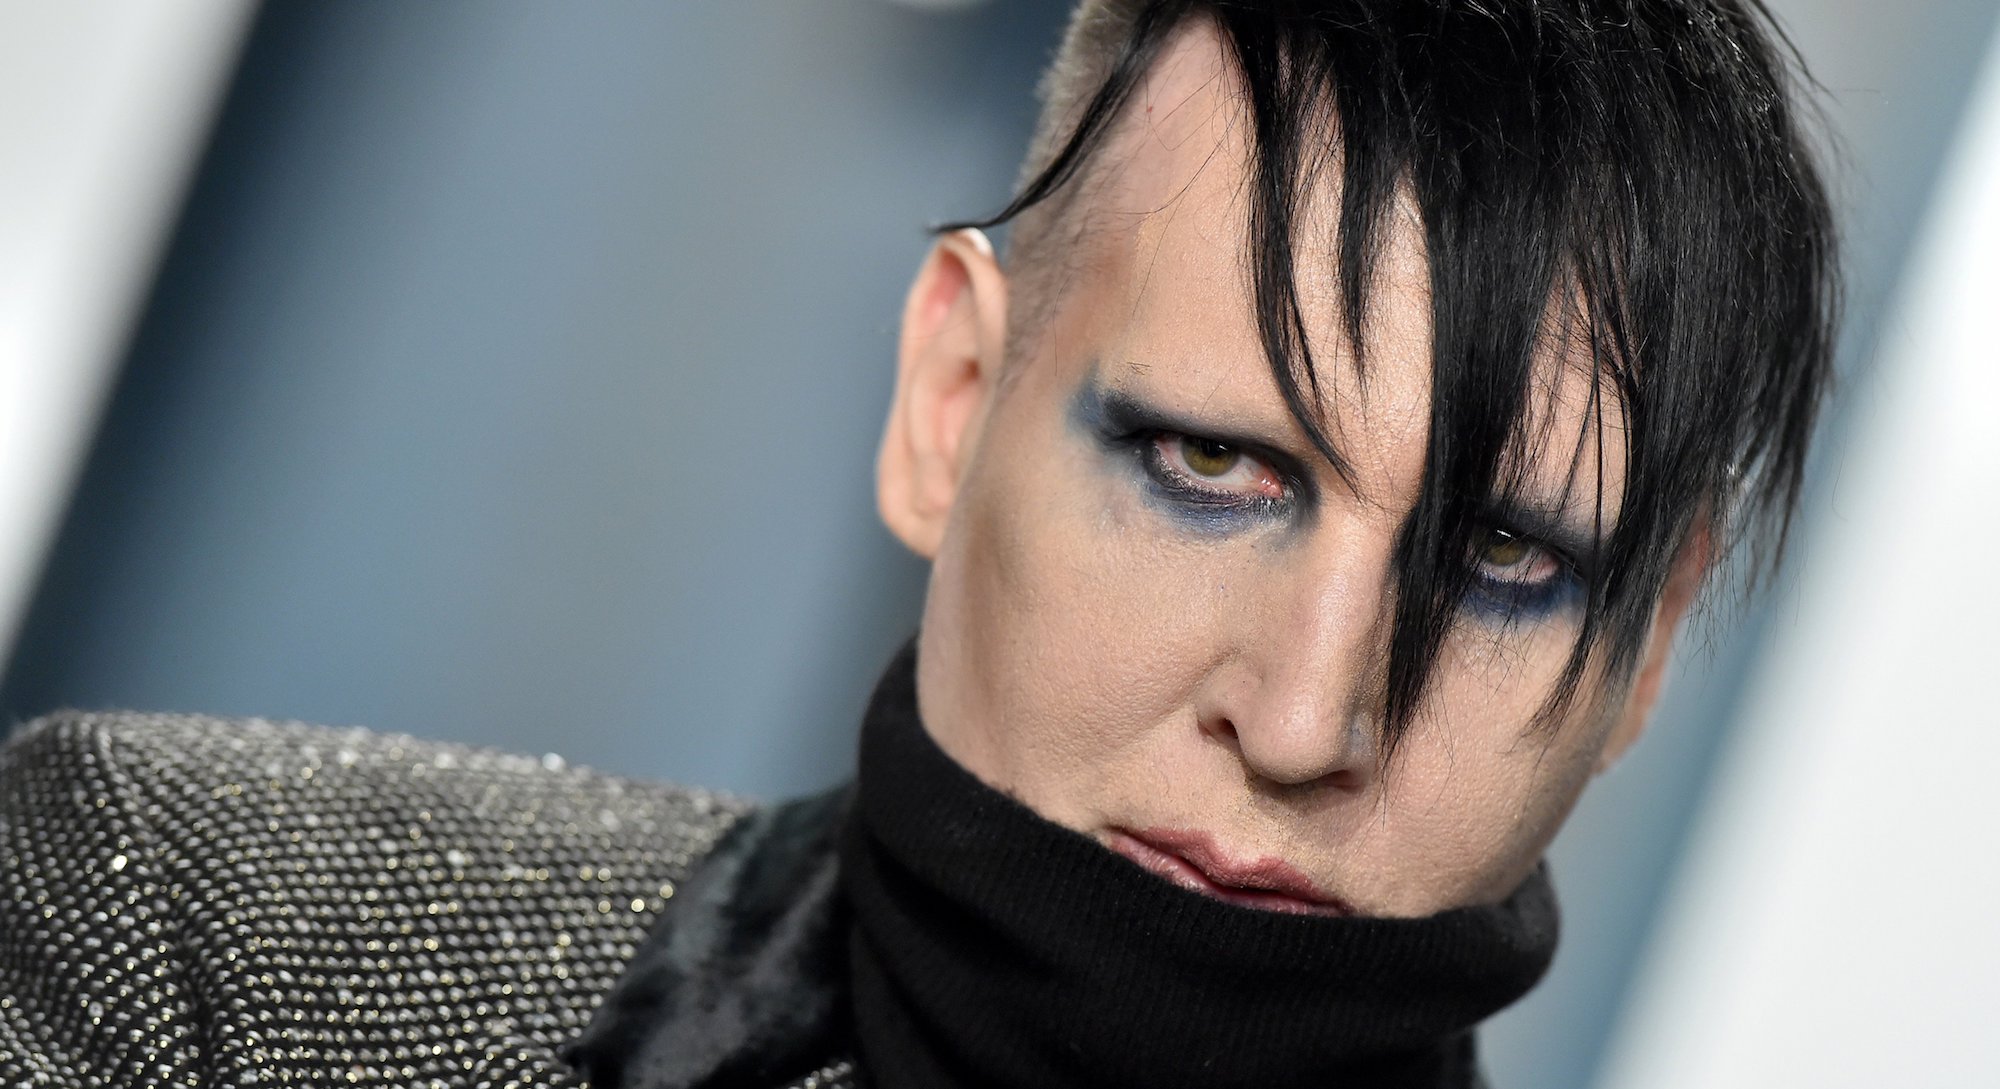 Fourth Accuser, Ashley Morgan Smithline, Sues Marilyn Manson for Sexual Assault